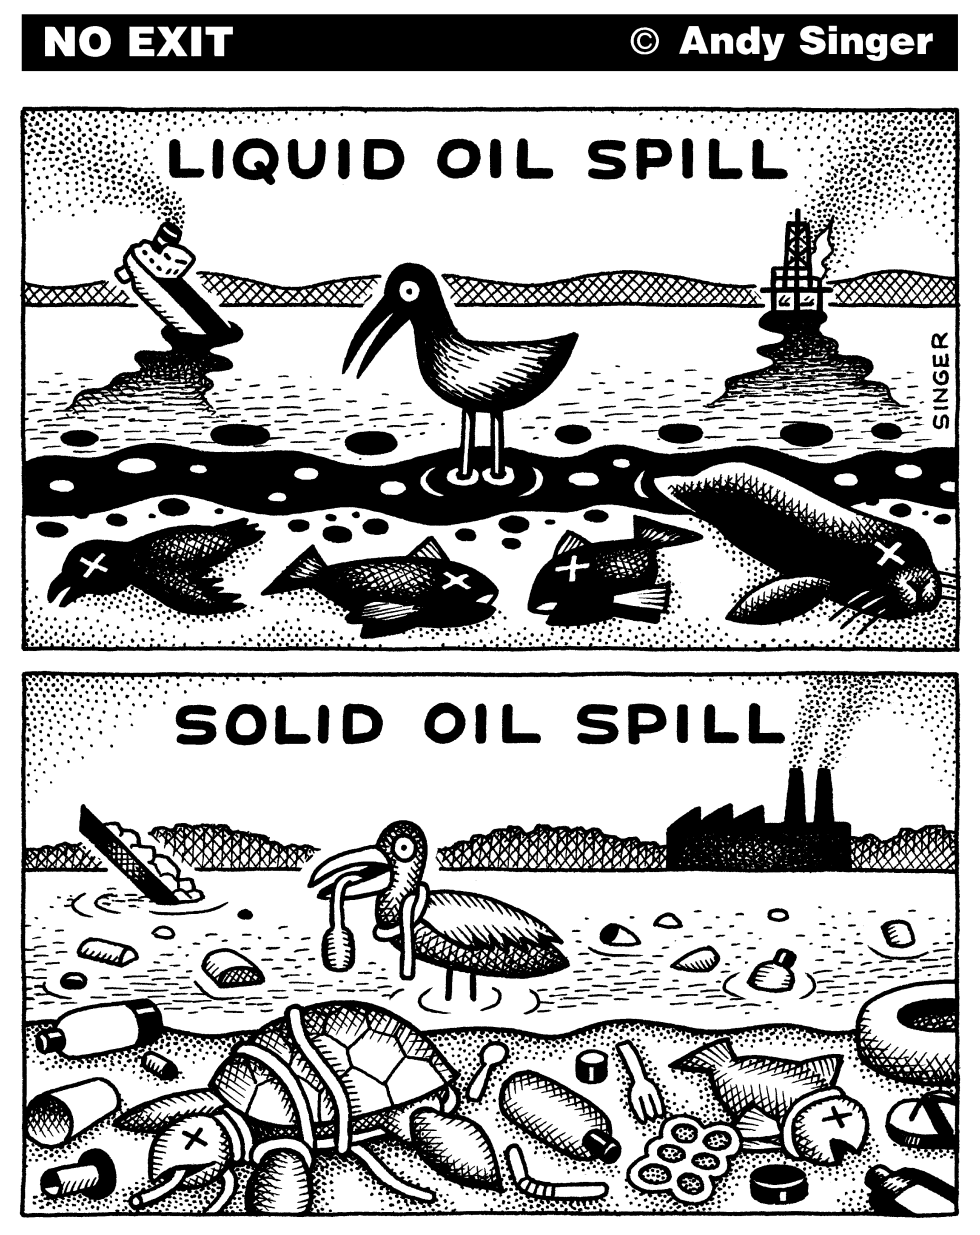 LIQUID AND SOLID OIL SPILLS by Andy Singer